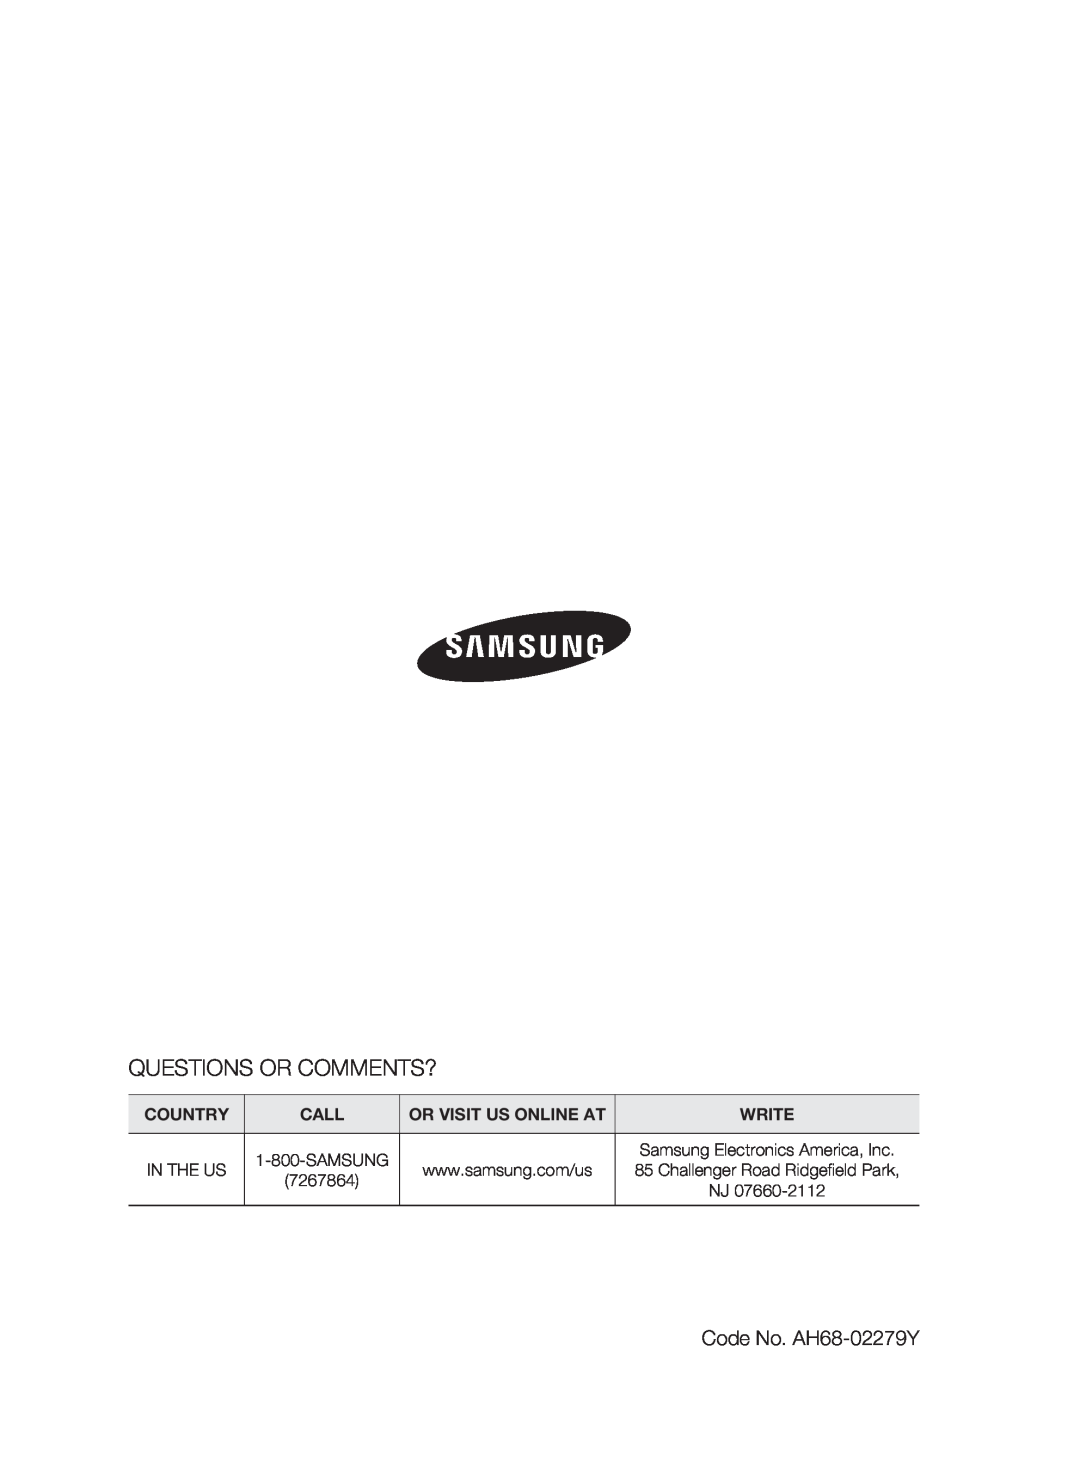 Samsung user manual Questions Or Comments?, Code No. AH68-02279Y, Country, Call, Or Visit Us Online At, Write 